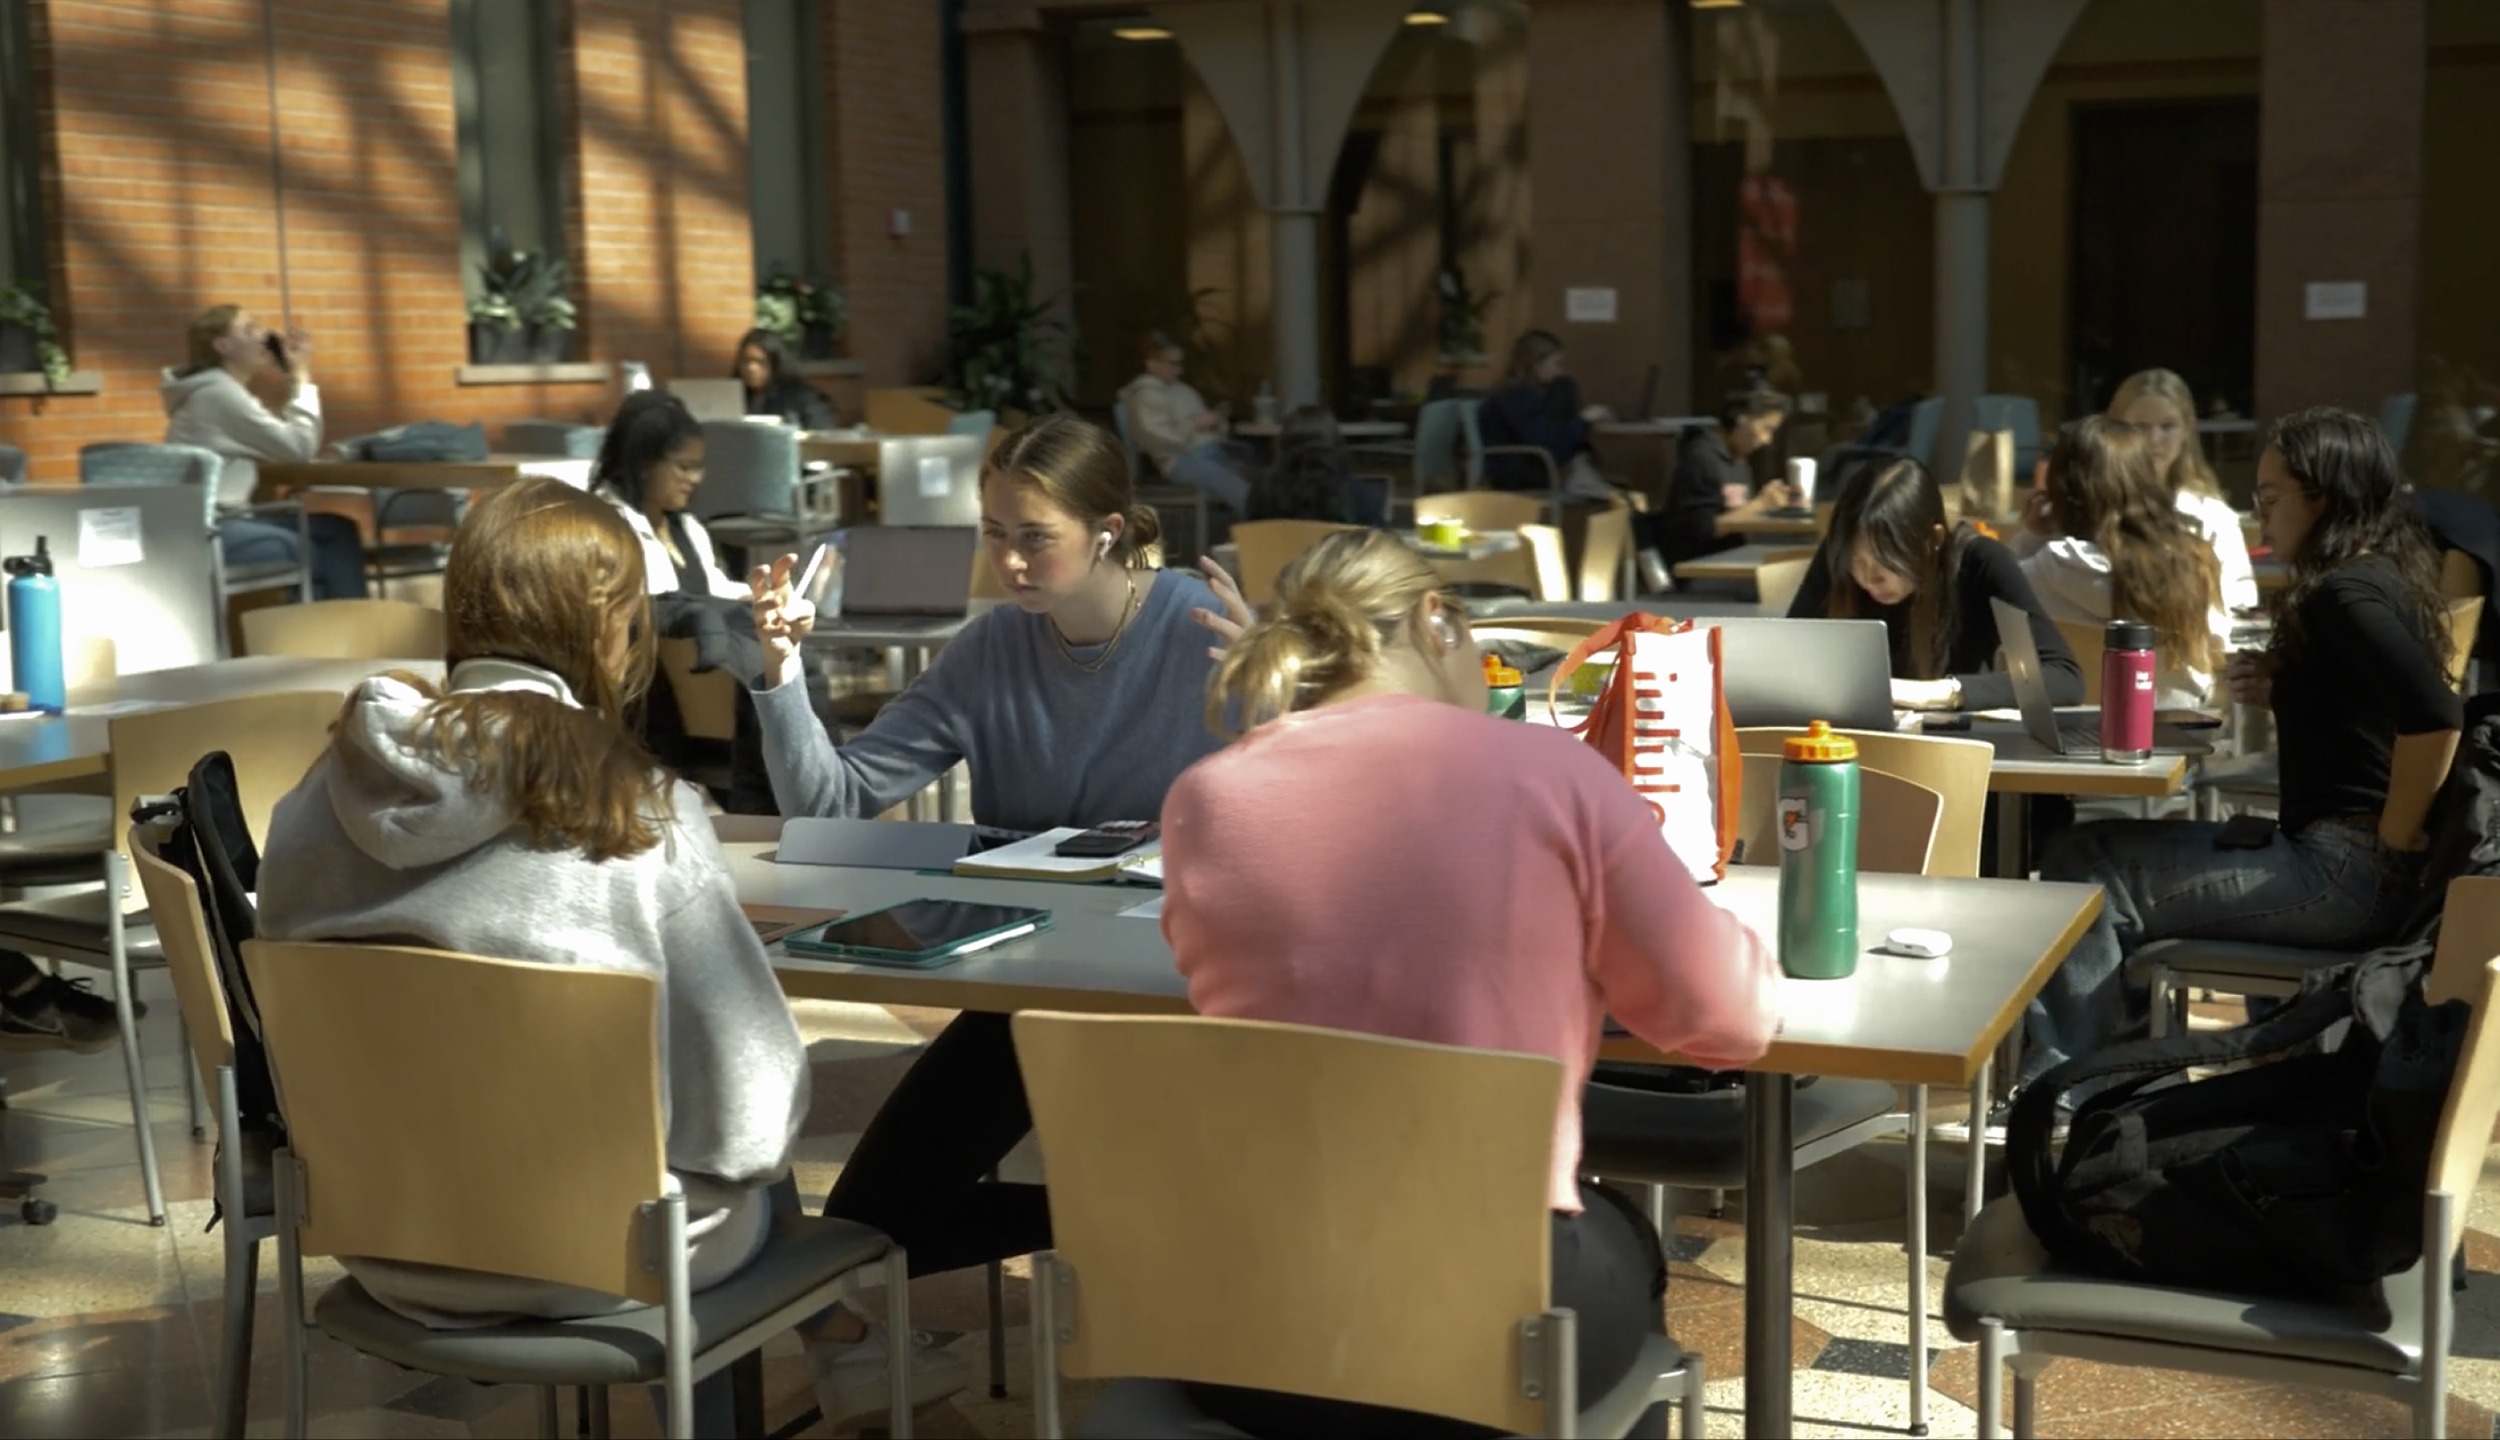 Students sitting at tables and doing school work